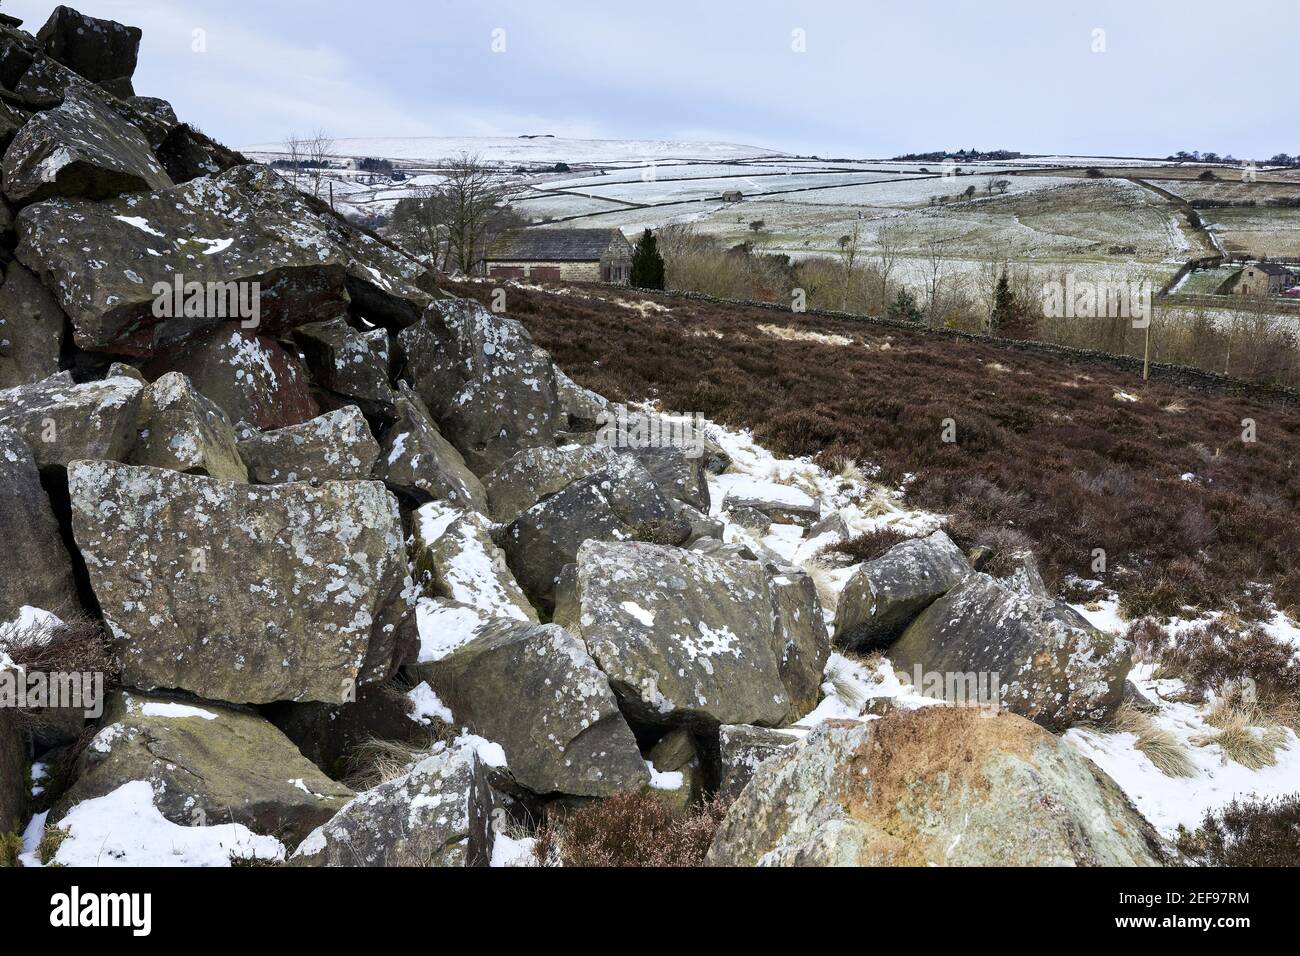 With tribute to the industrial past of Nidderdale, a view through discarded rocks and spoil heaps Stock Photo